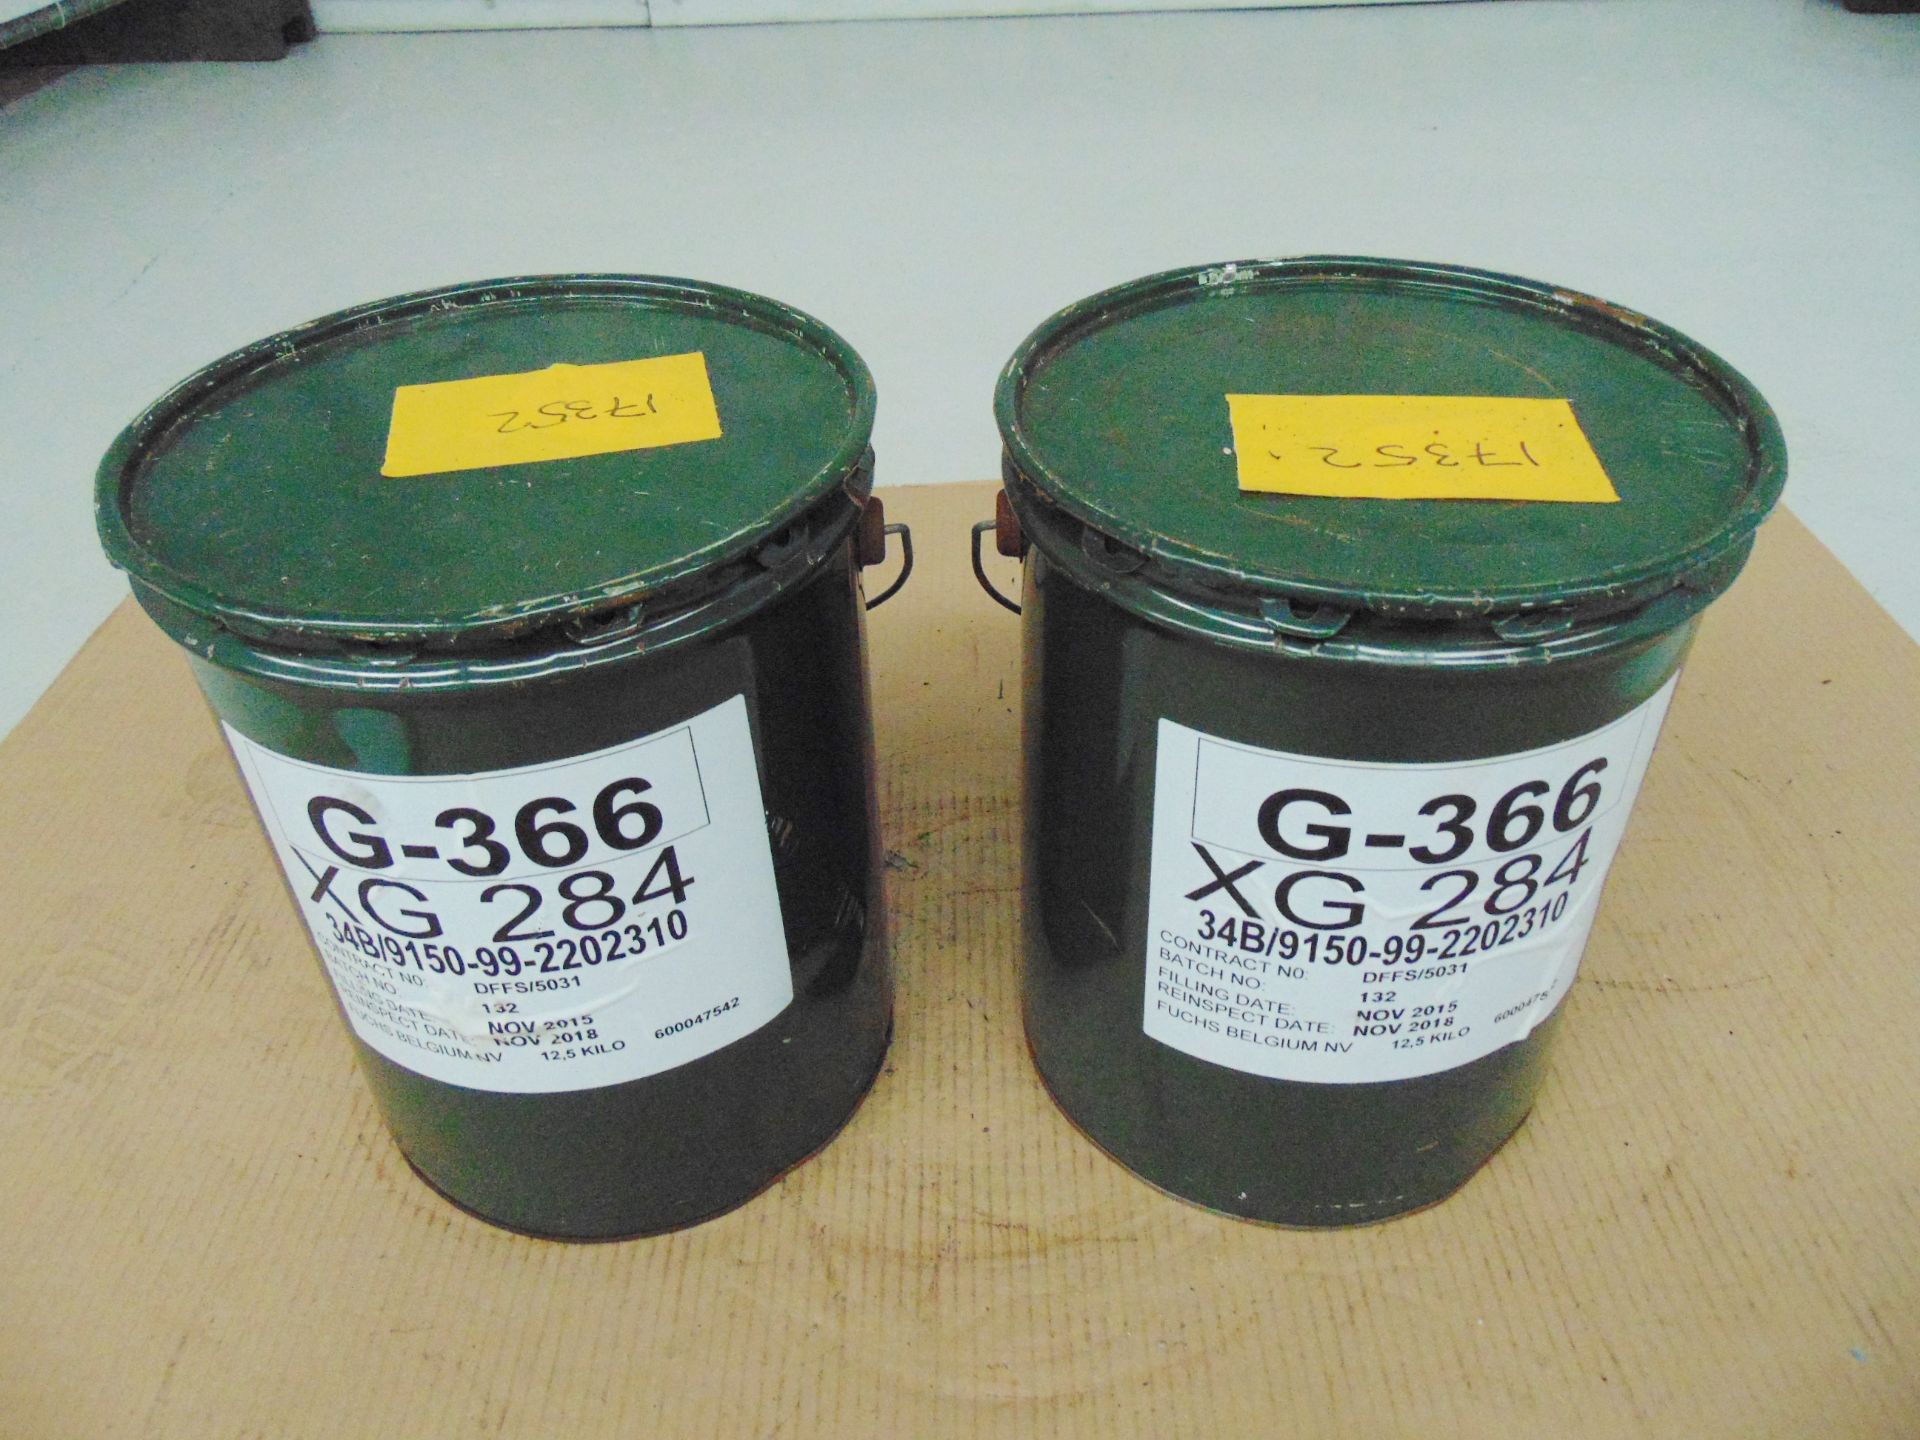 2 x Unissued 12.5Kg Tins of XG-284 G-366 Grease - Image 2 of 3